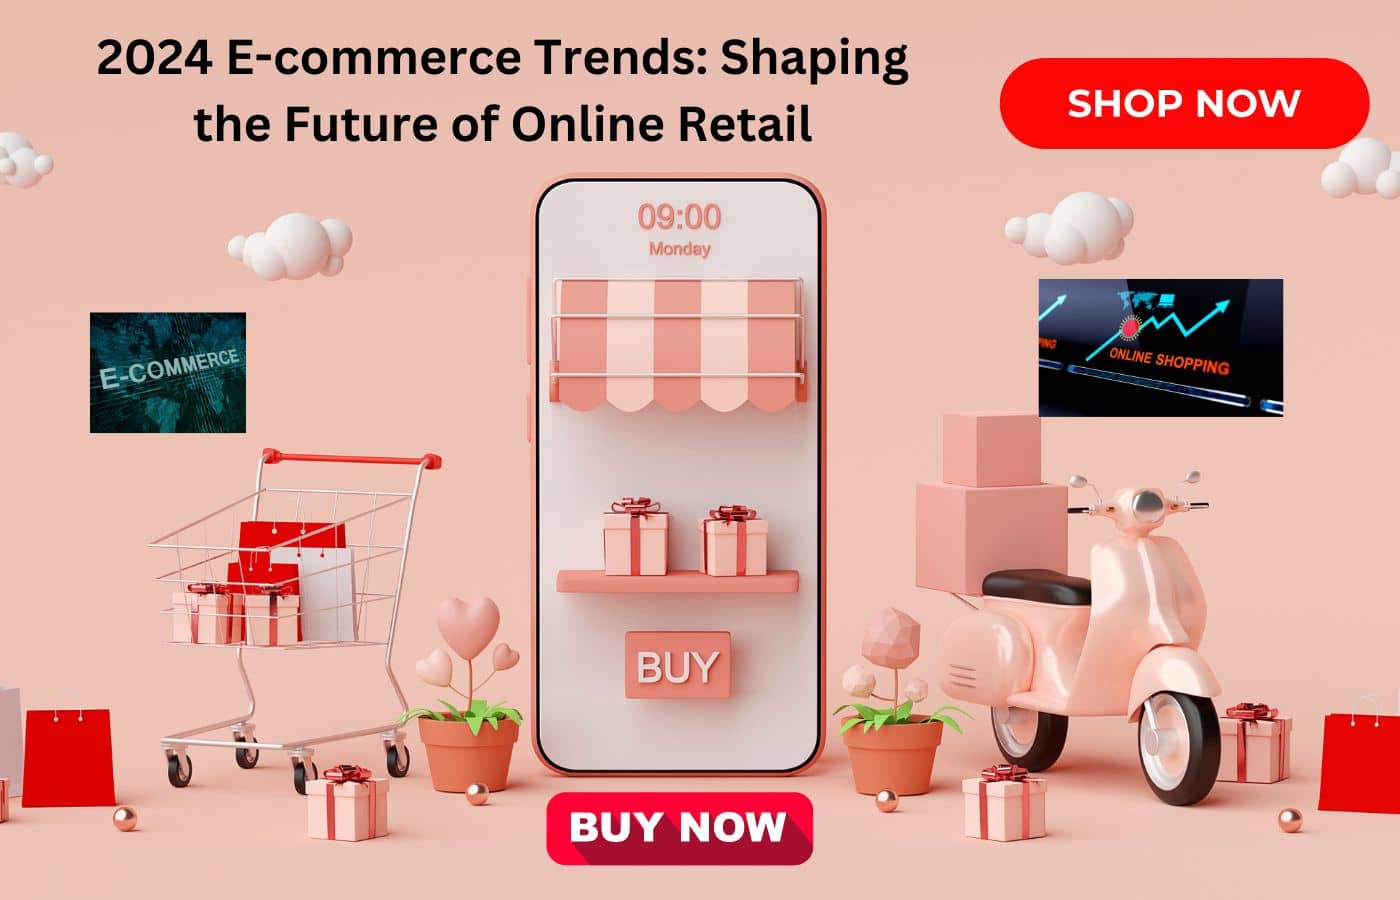 2024 E-commerce Trends Shaping the Future of Online Retail